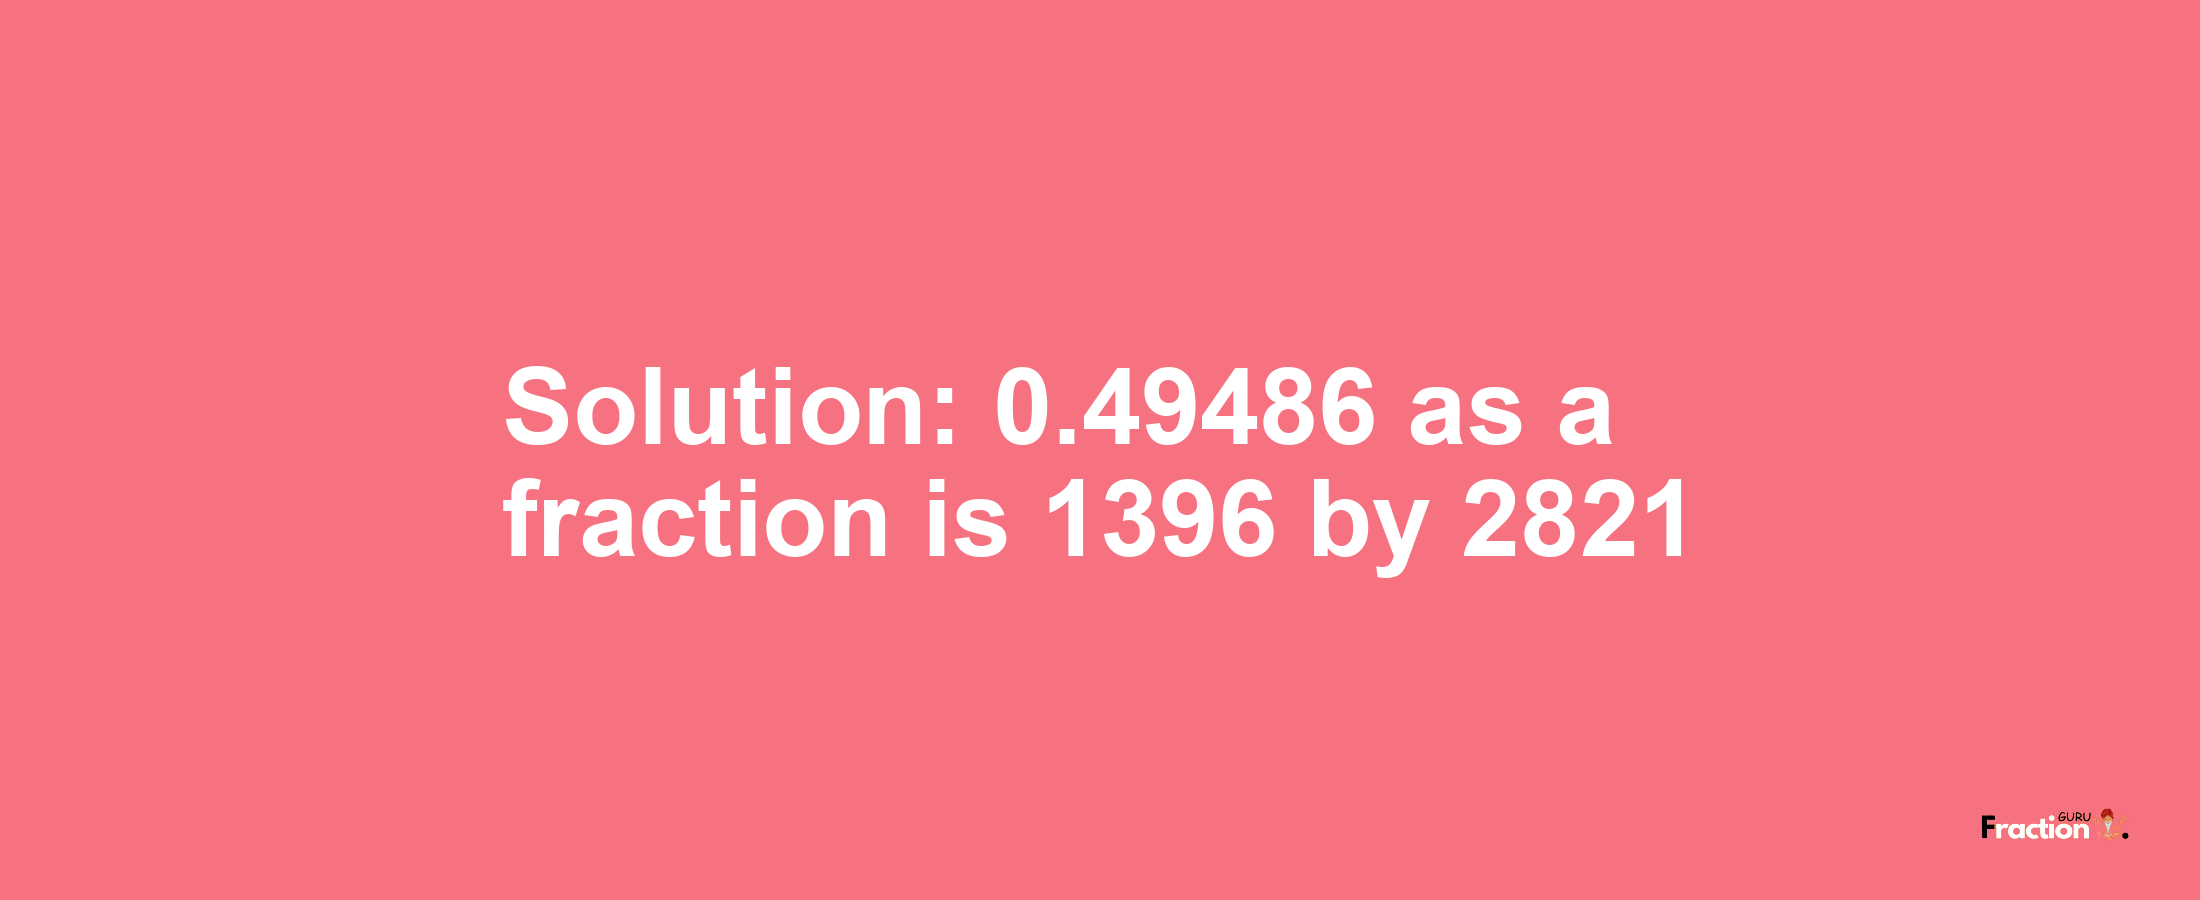 Solution:0.49486 as a fraction is 1396/2821